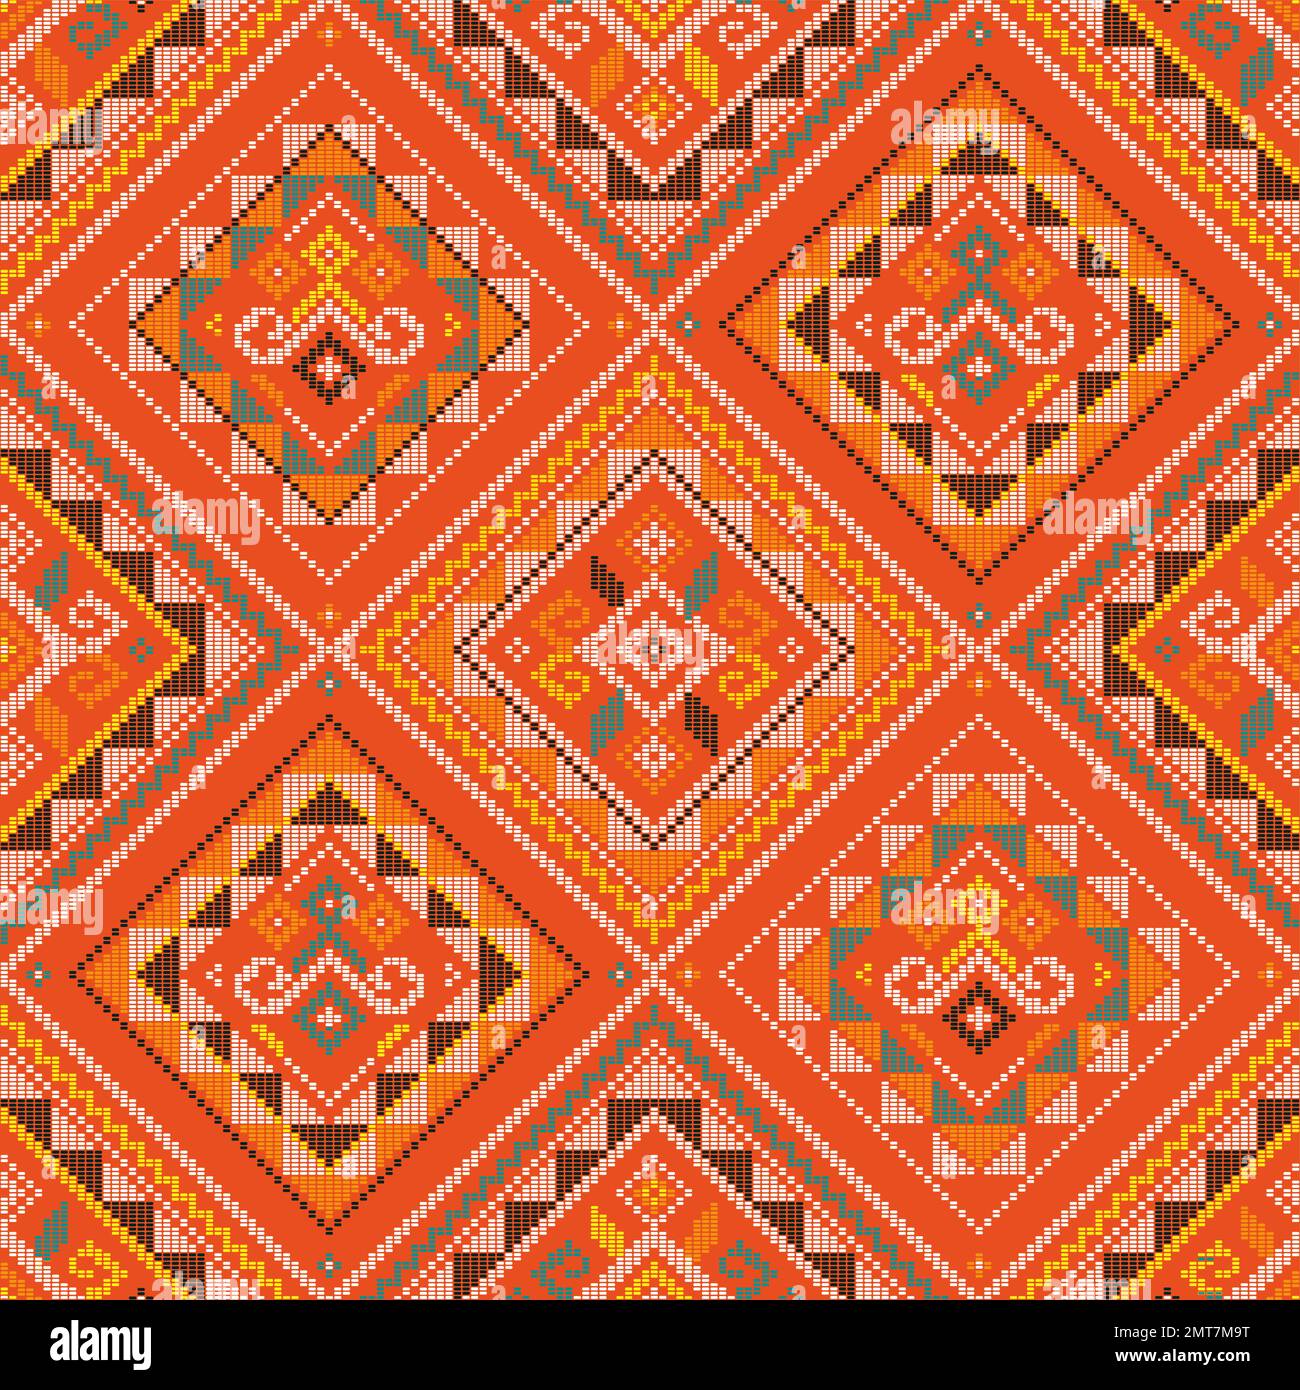 Indian fabric surface pattern design Royalty Free Vector